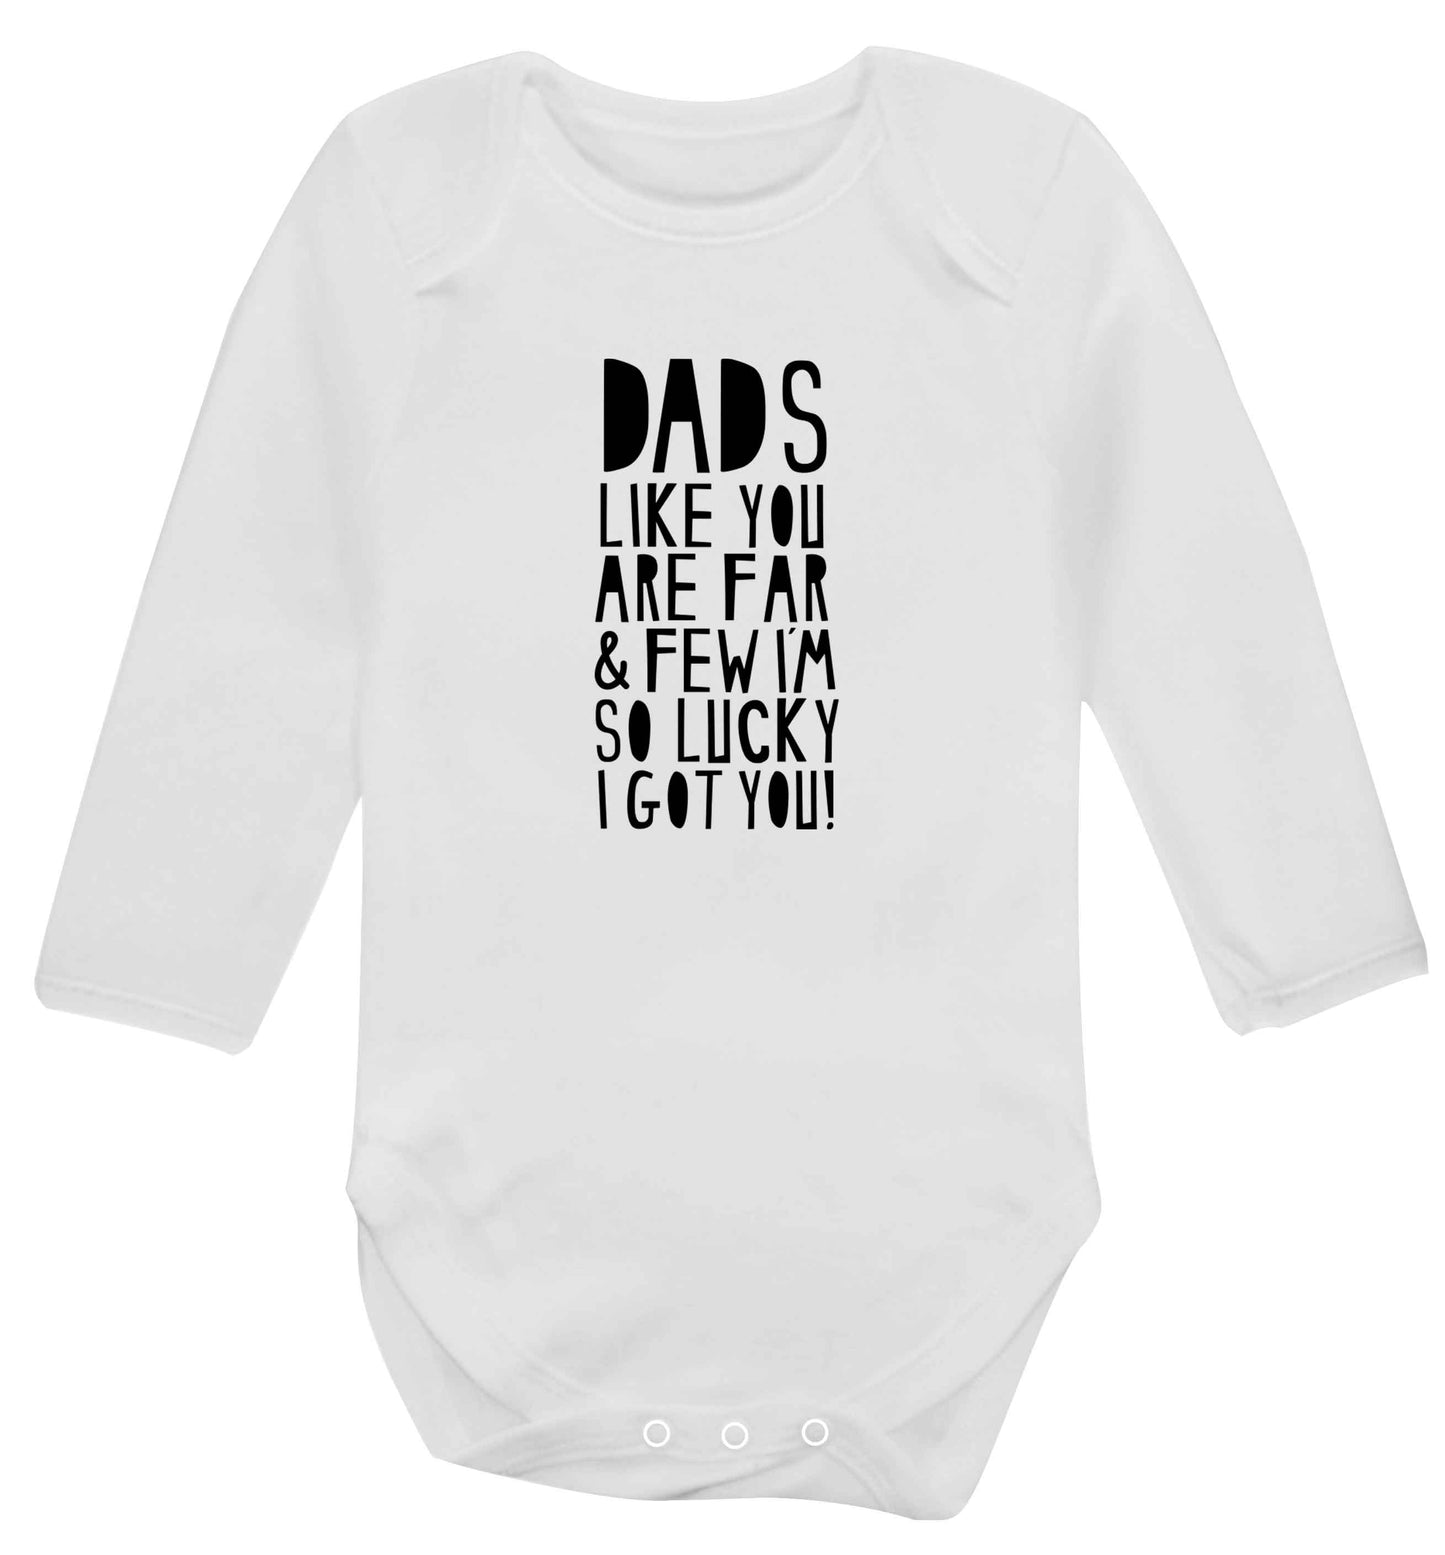 Dads like you are far and few I'm so luck I got you! baby vest long sleeved white 6-12 months